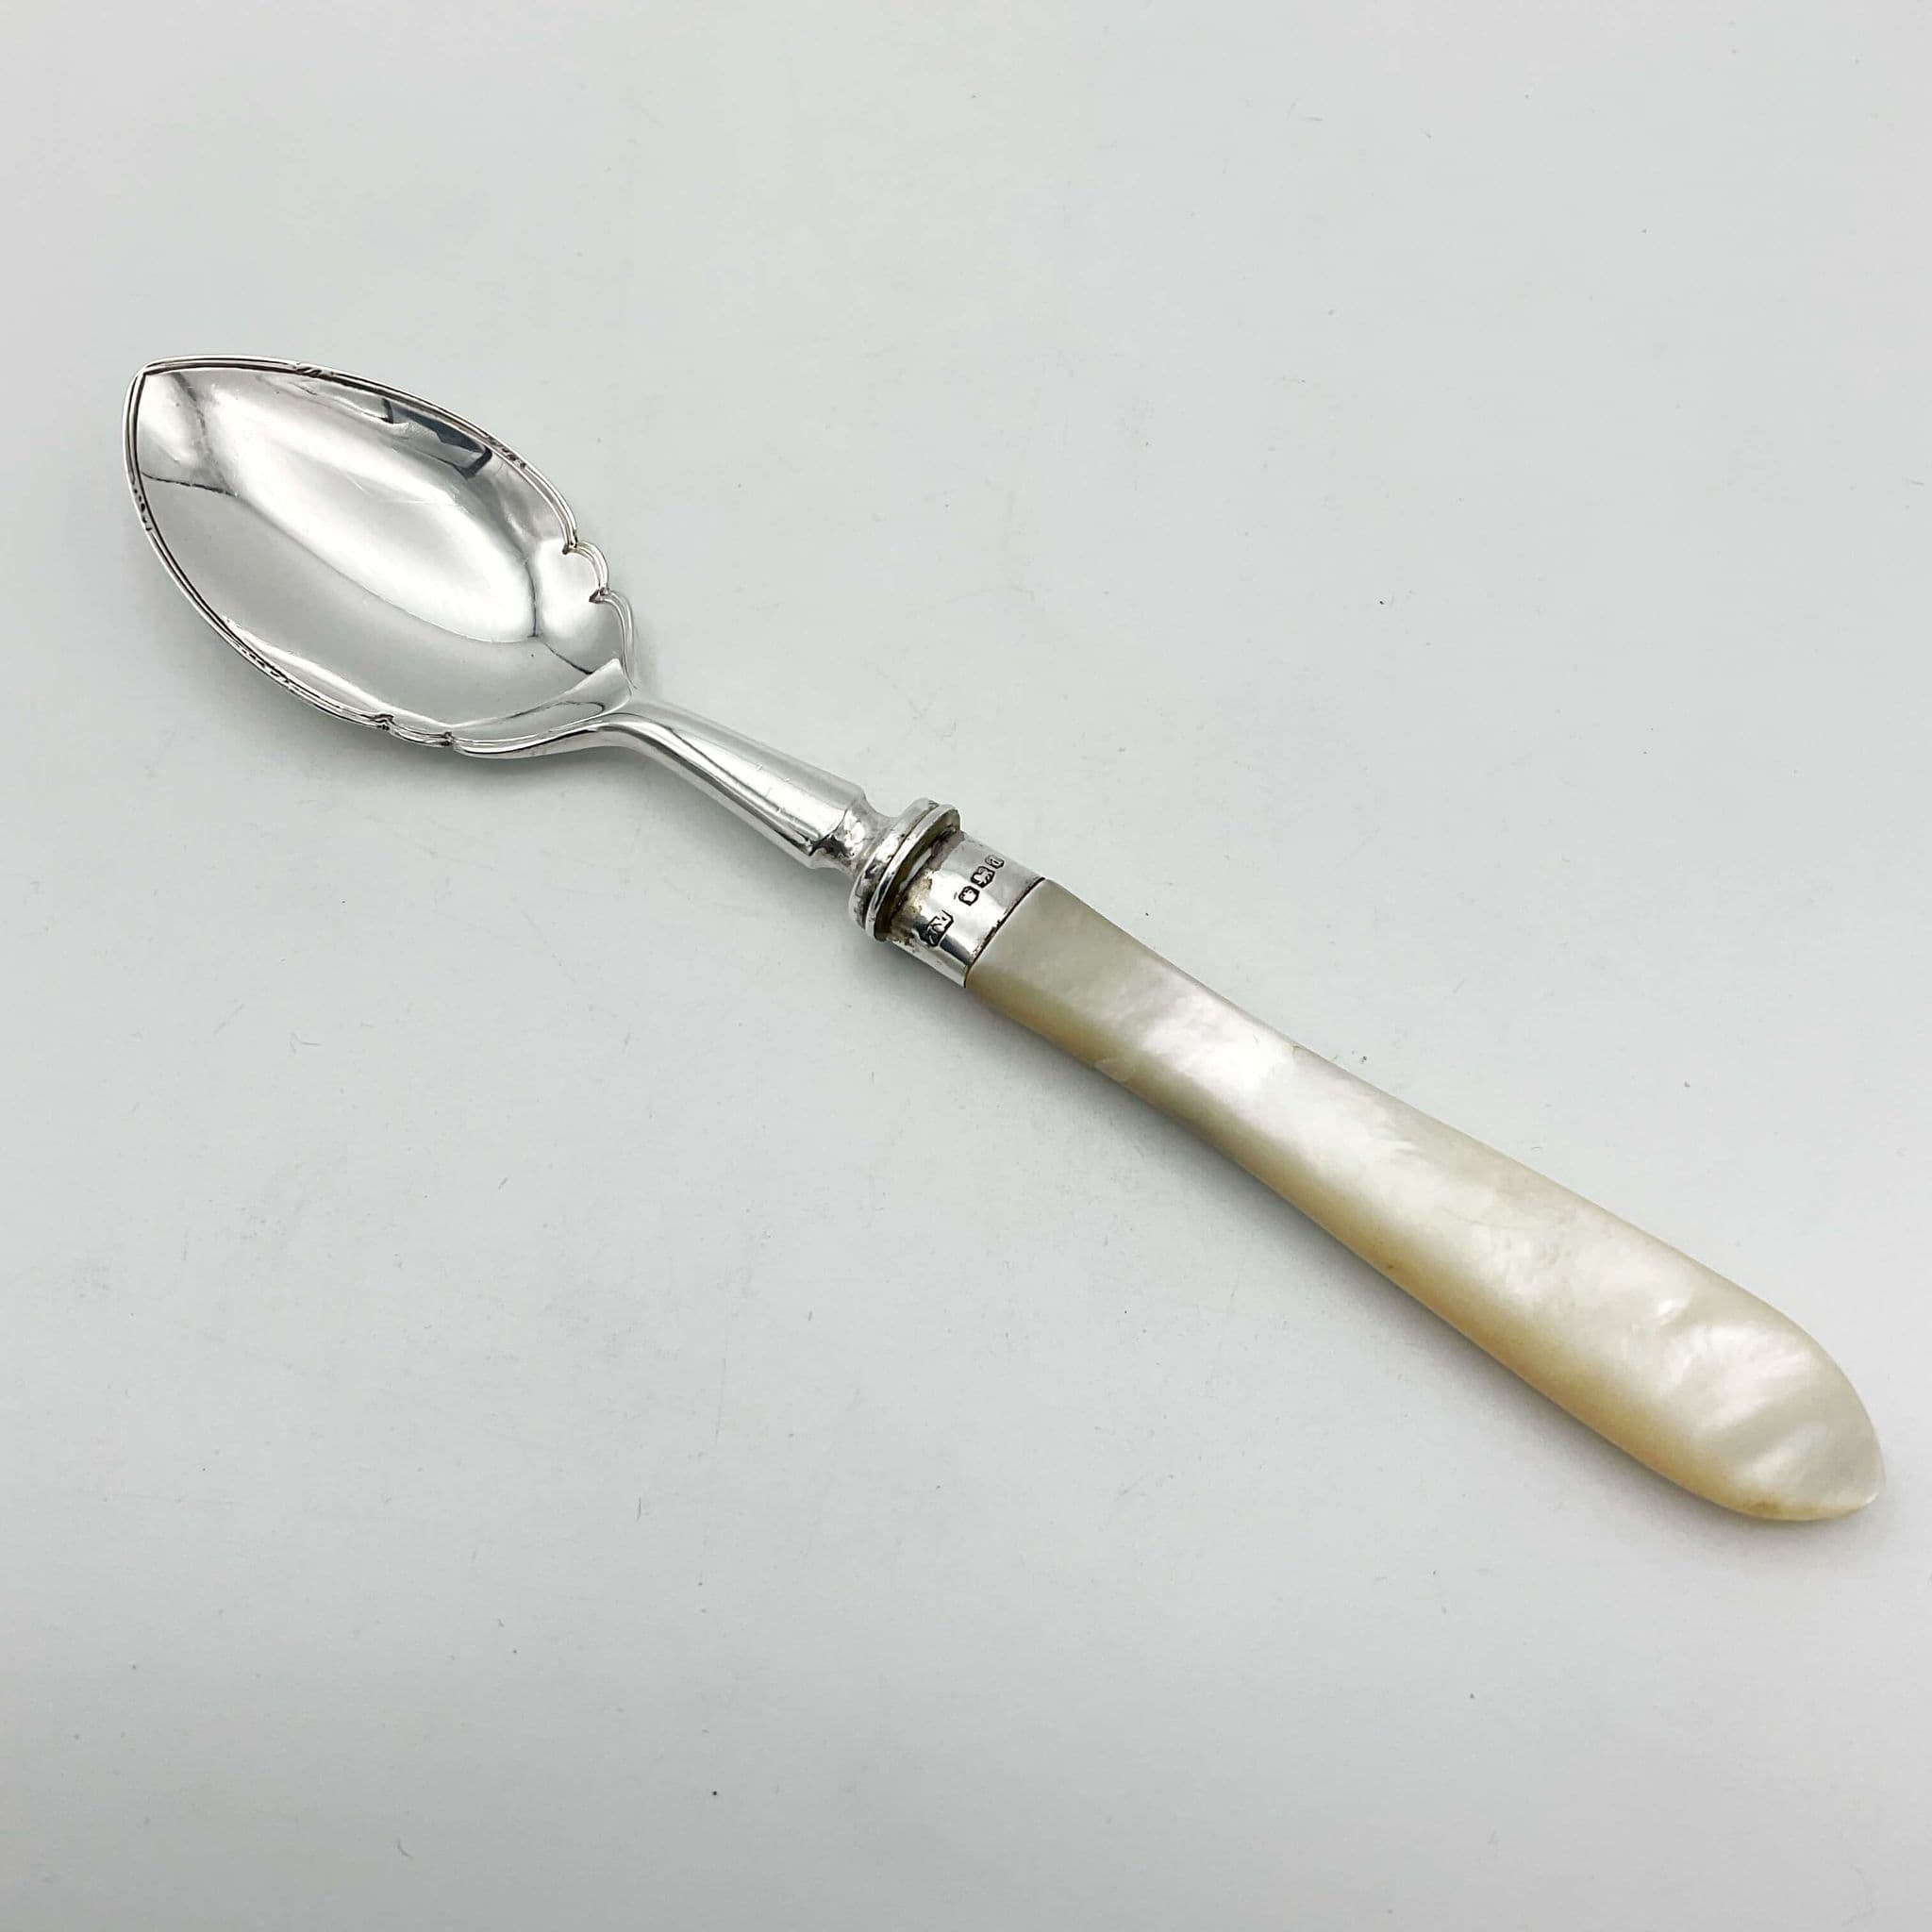 BEAUTIFUL Antique Silver Jam Jelly Spoon,lustrous Mother of Pearl,engraved  Spoon, Collectible Vintage Serving Silverware -  Australia